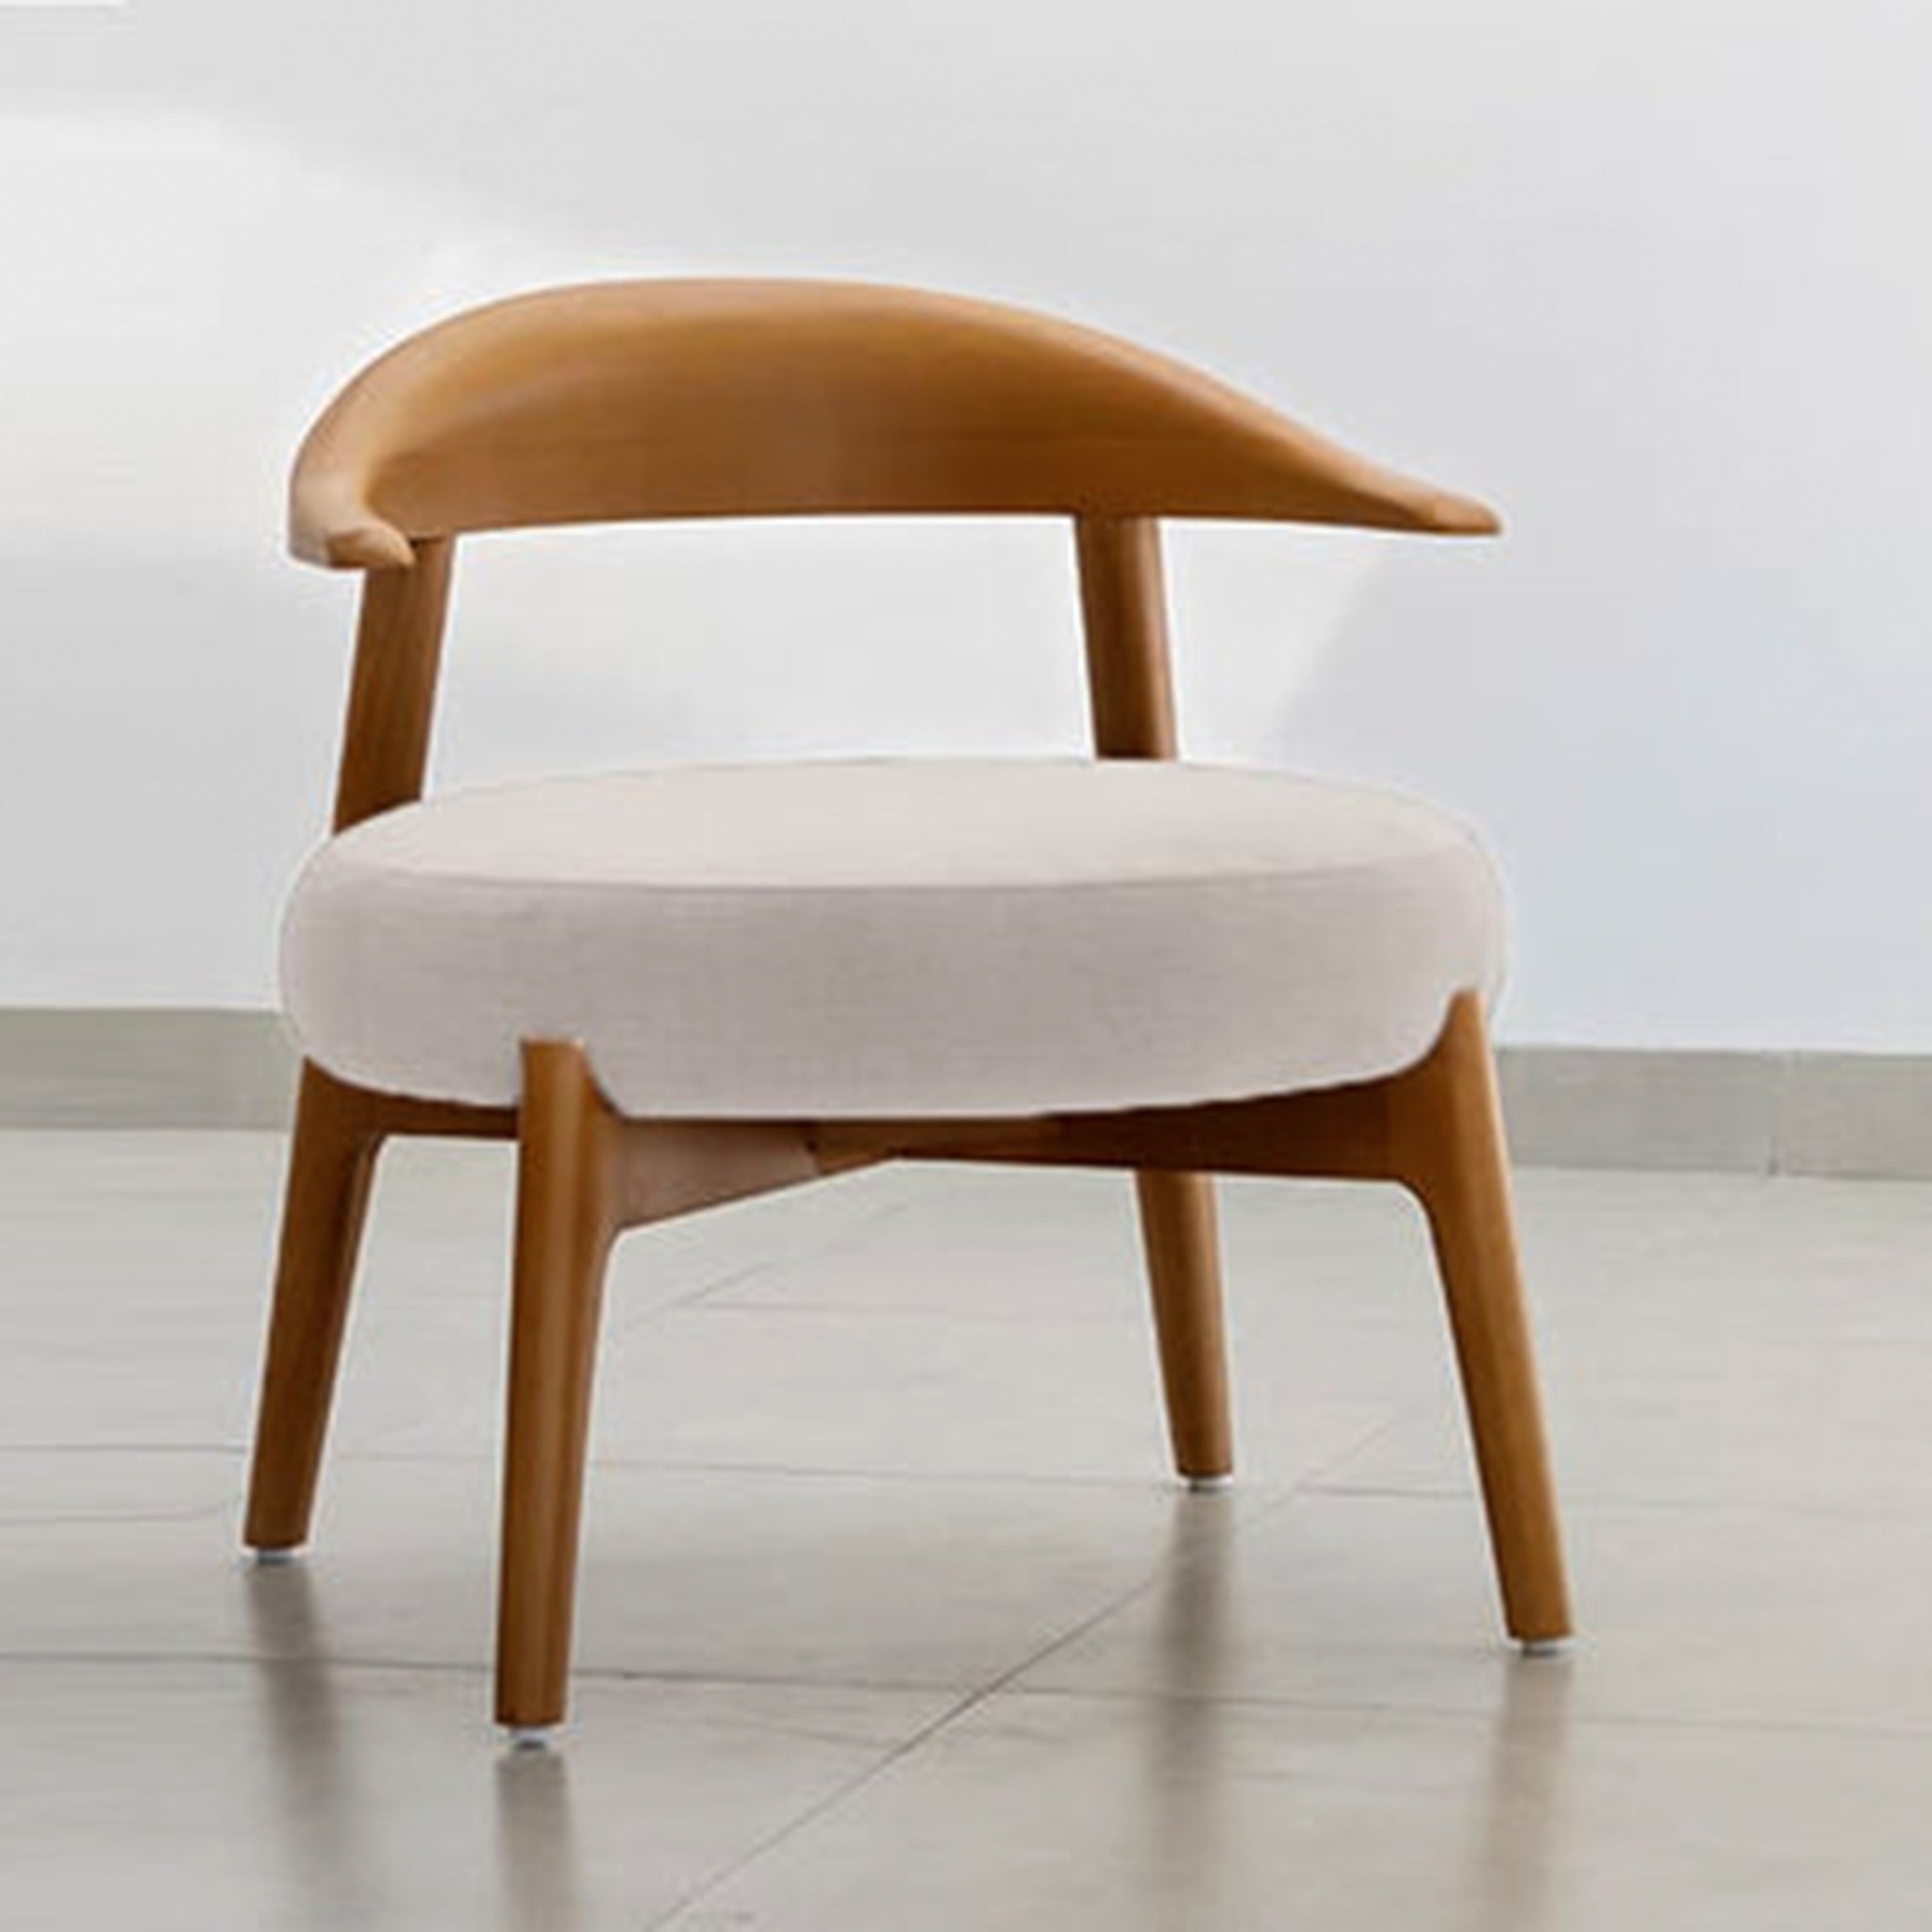 "The Hyde Accent Chair with its unique wooden curves and cozy seat"